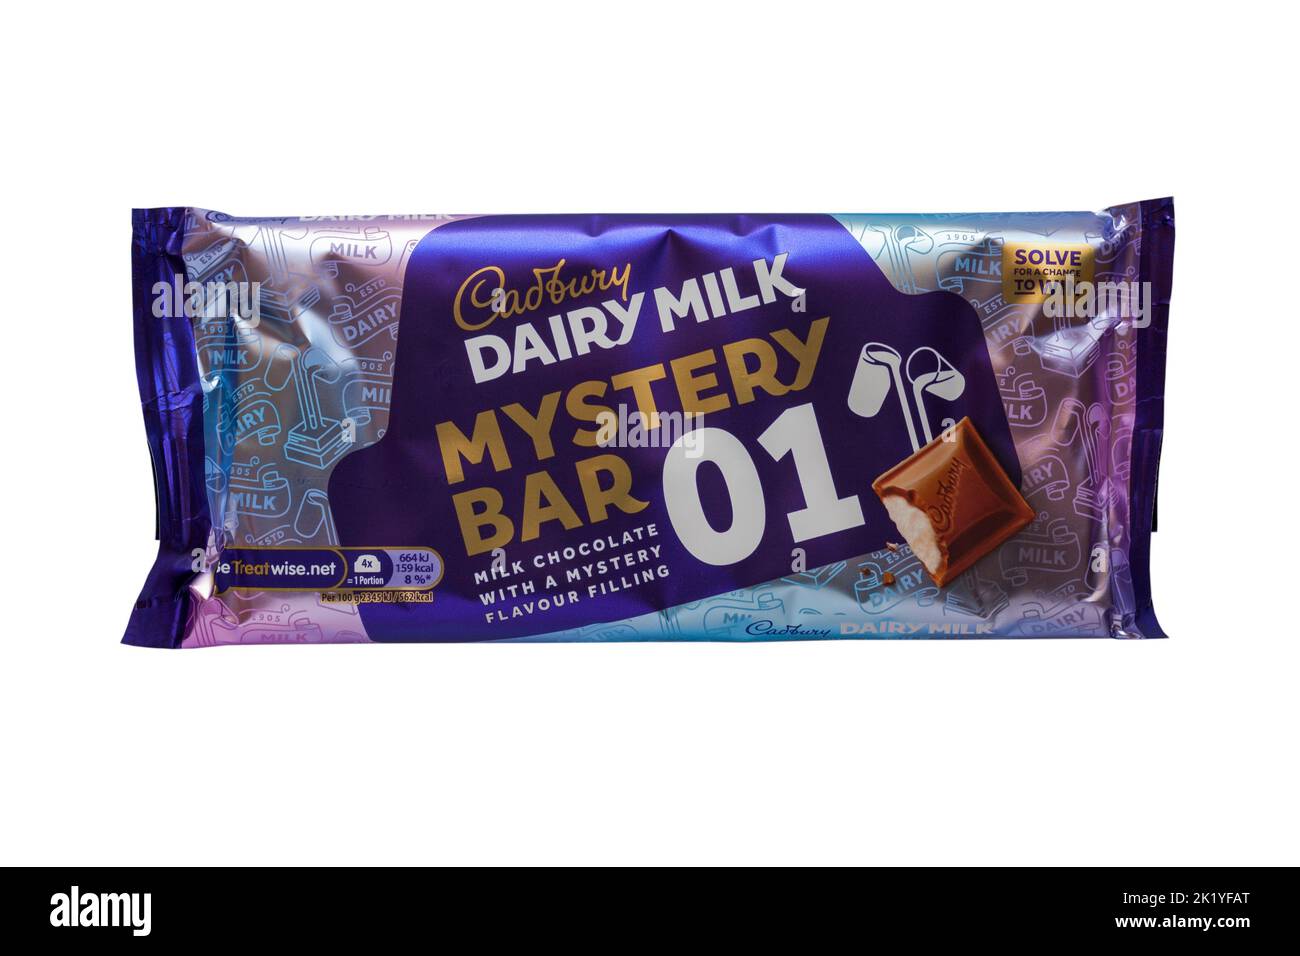 Cadbury Dairy Milk Mystery Bar 01 milk chocolate with a mystery flavour filling chocolate bar isolated on white background Stock Photo